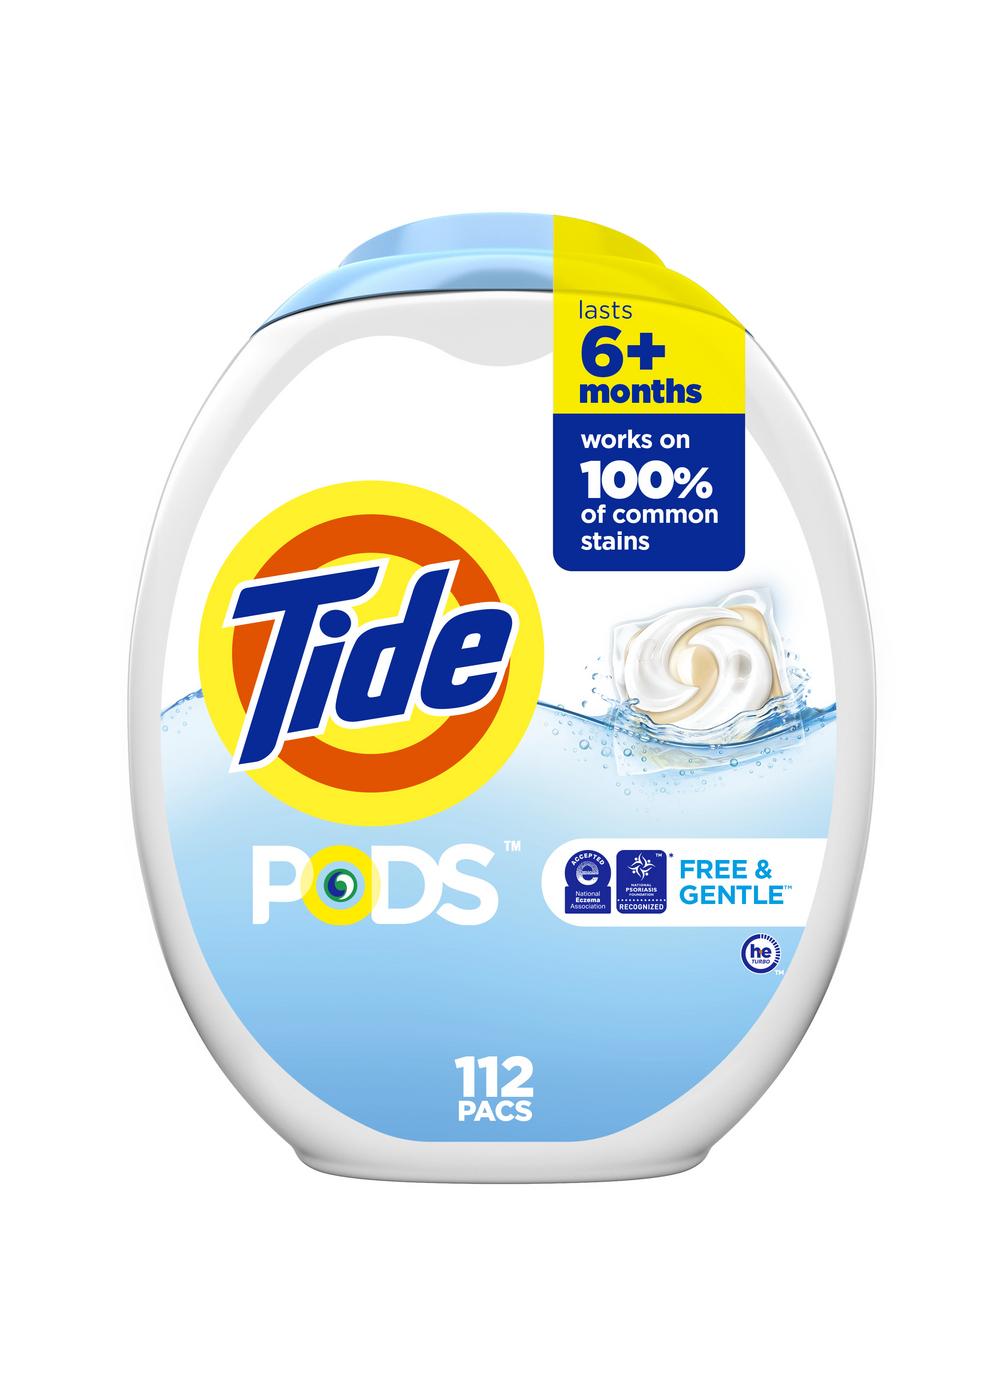 Tide PODS Free & Gentle Coldwater Clean HE Laundry Detergent Pacs; image 10 of 10